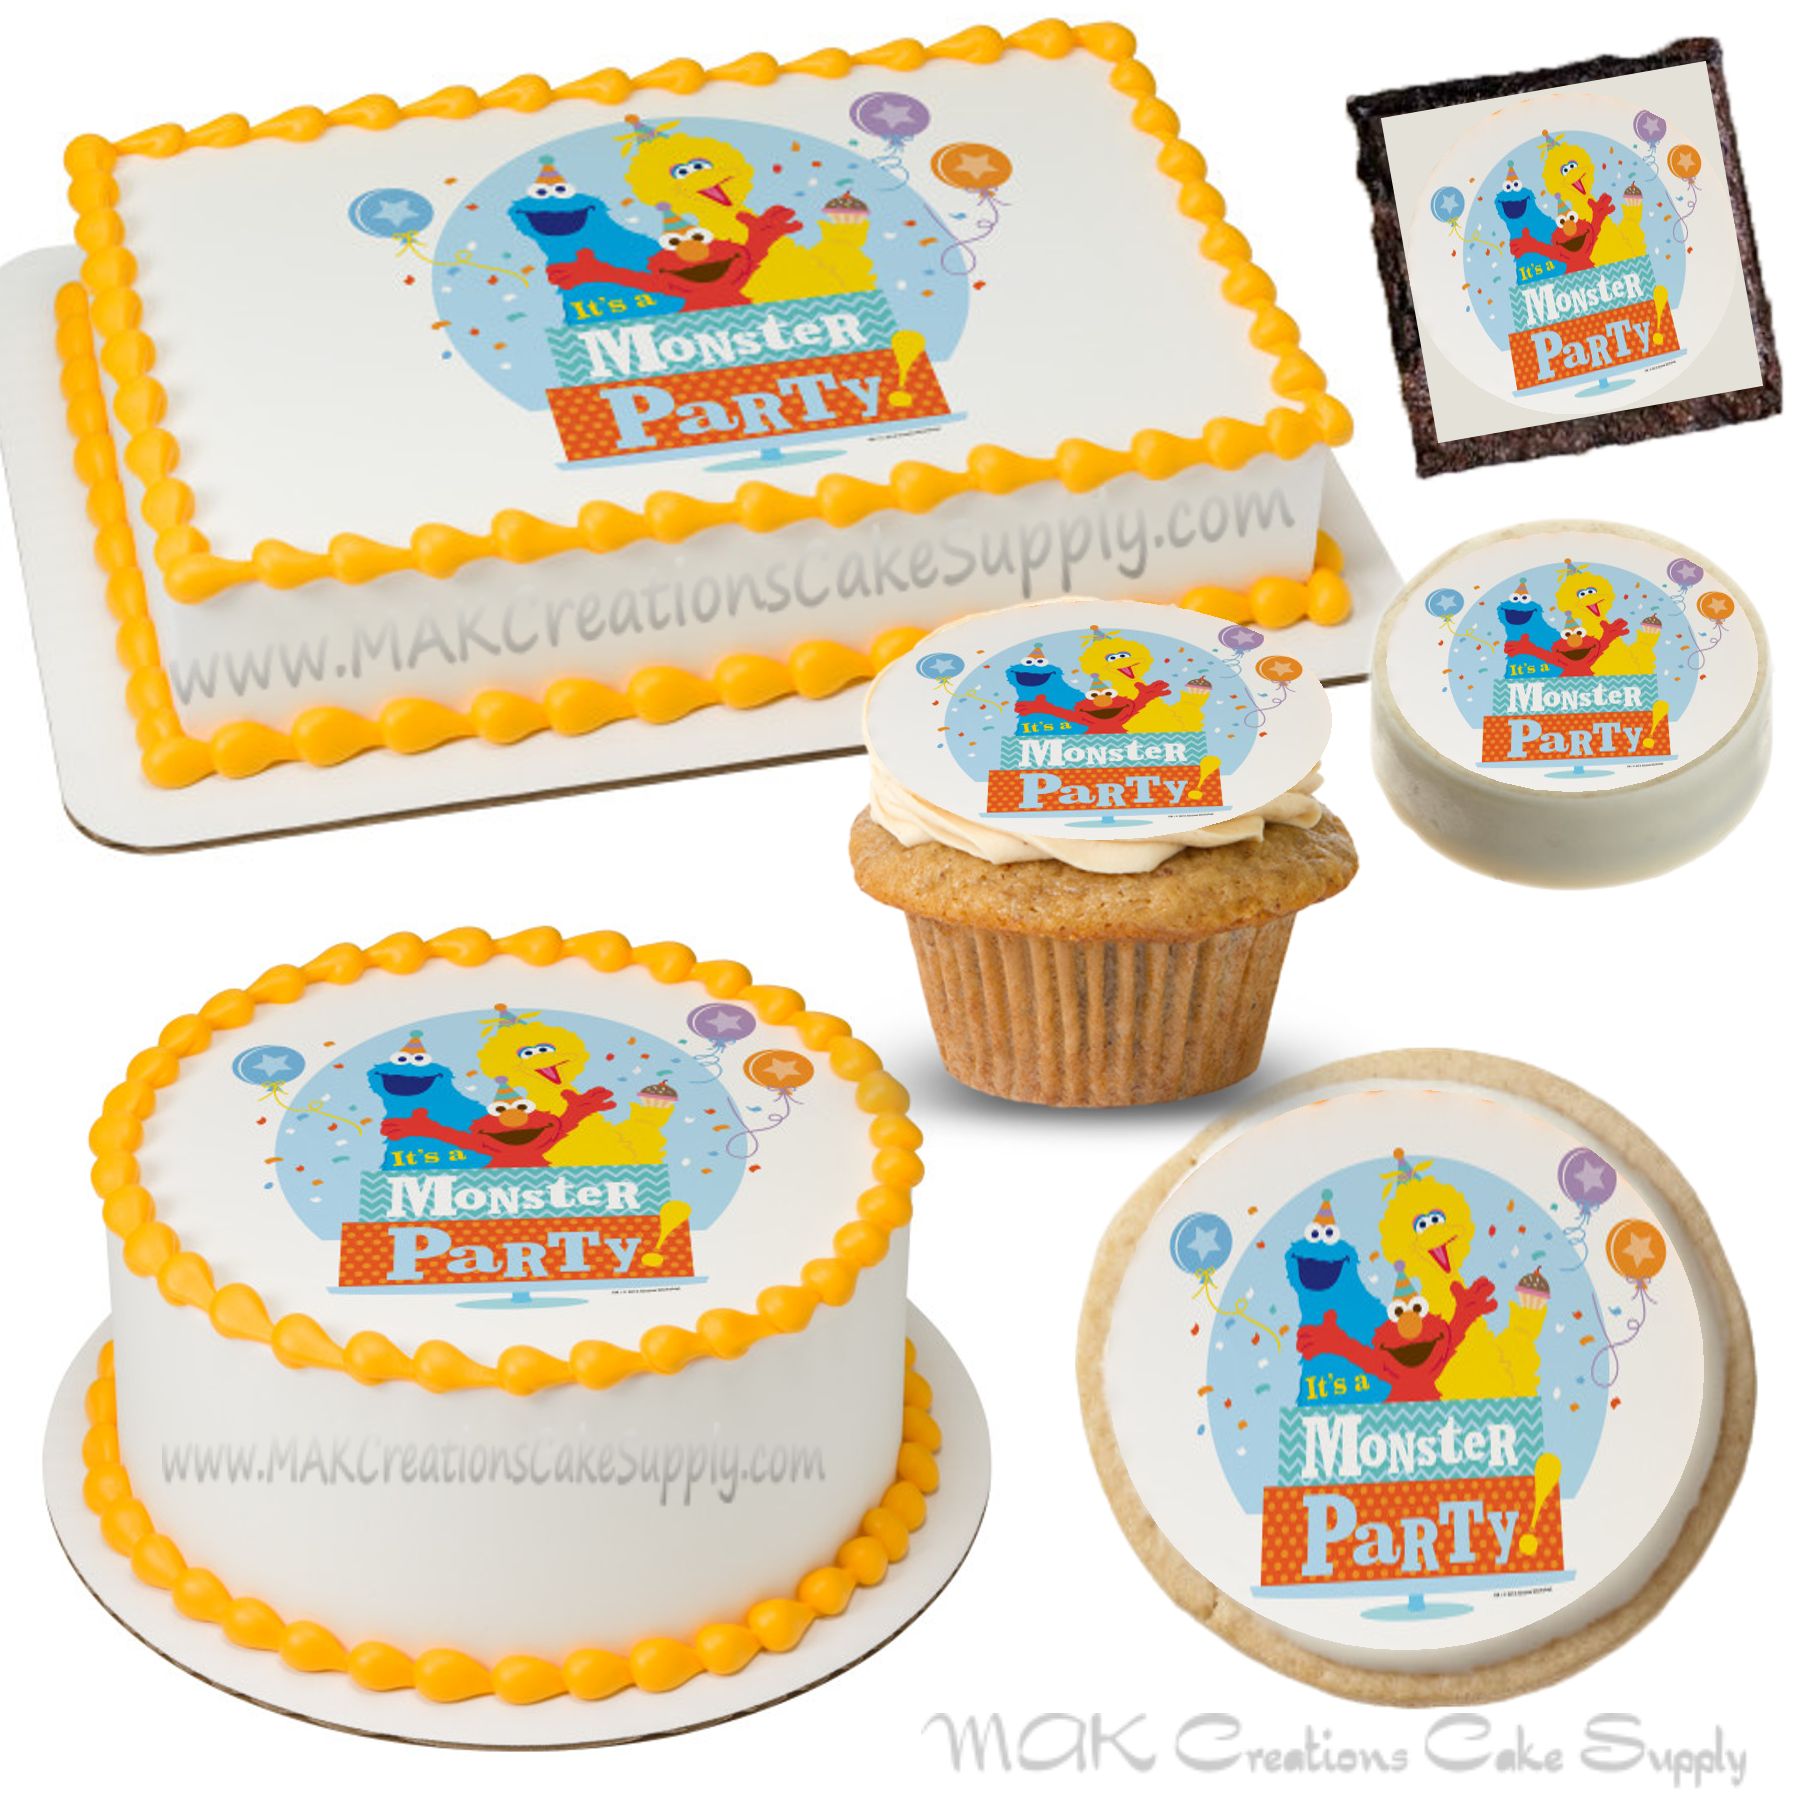 Elmo party decoration round edible party cake topper cake image 